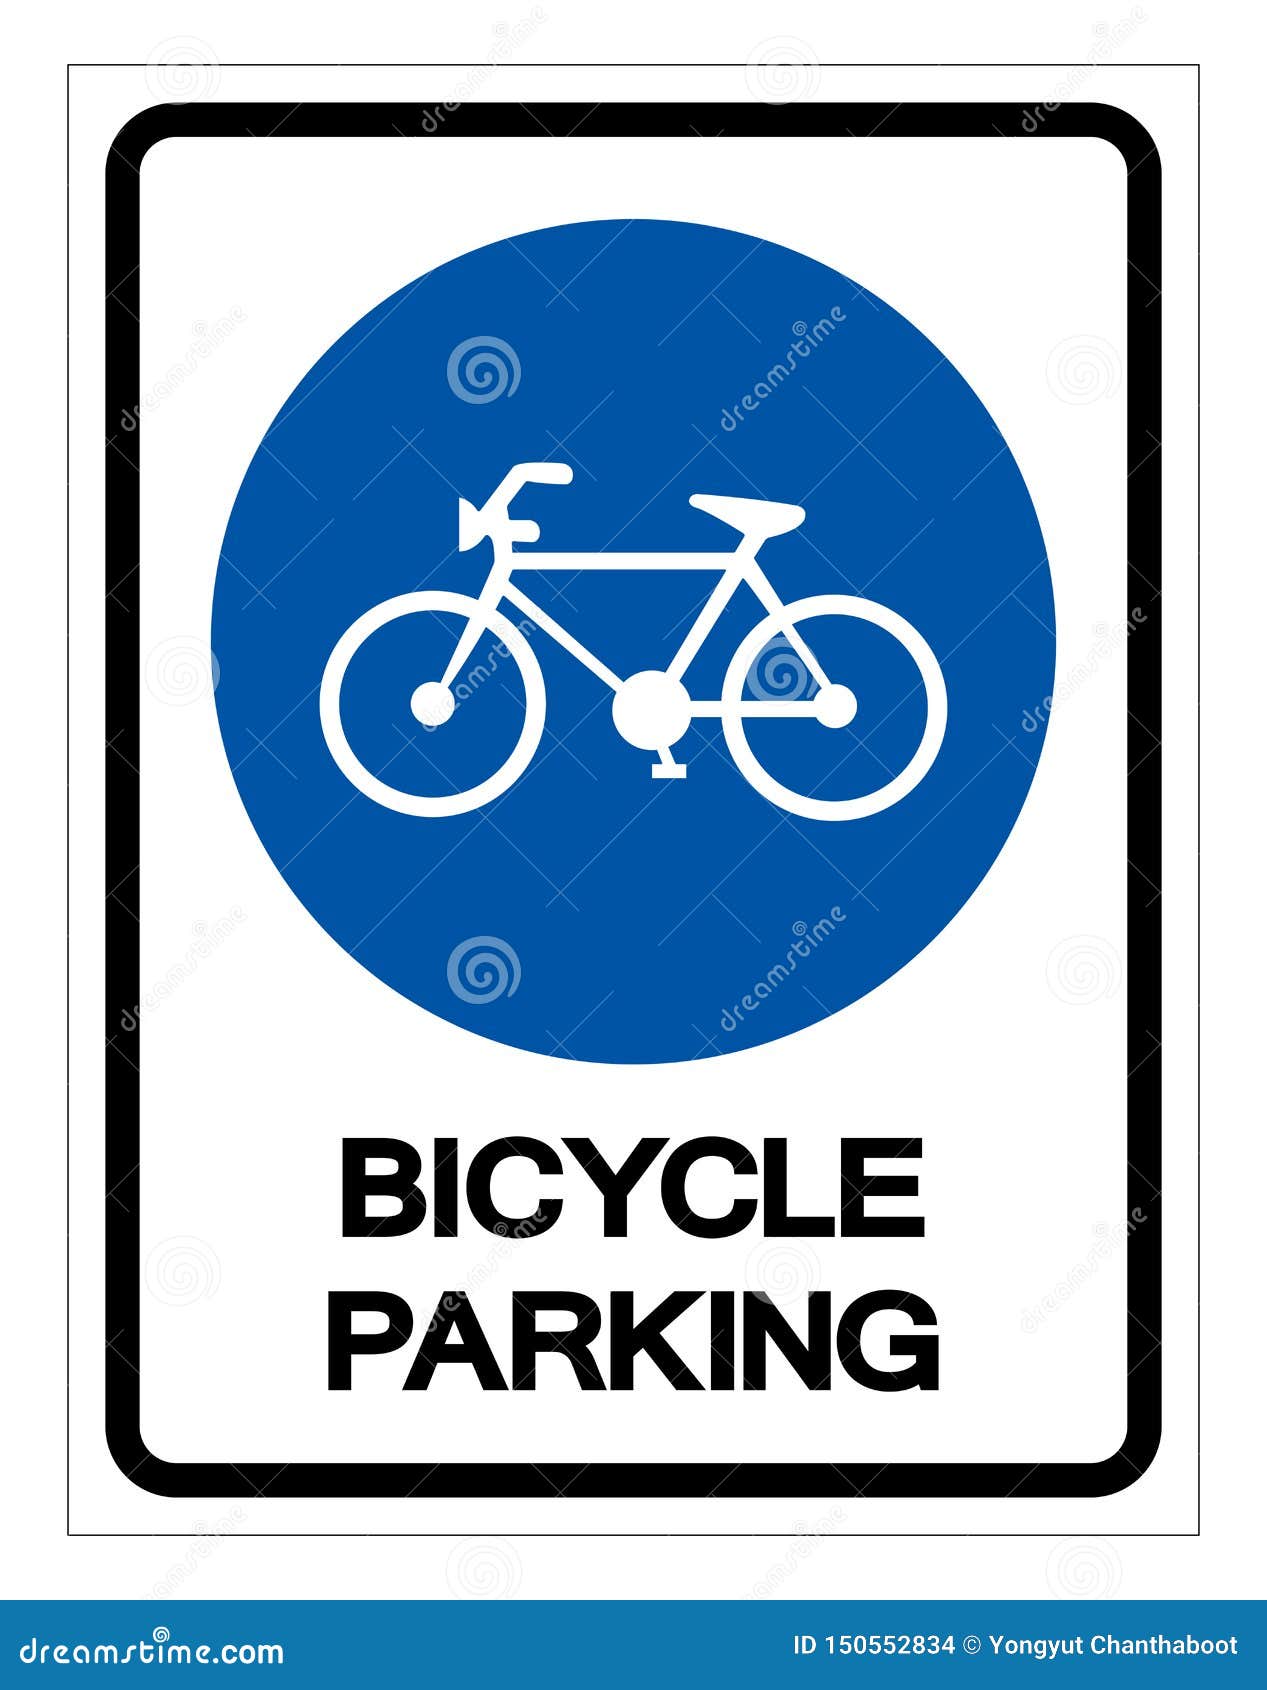 Brady Part: 310367 | Electrical Vehicle Parking Sign - Parking space  reserved for charging your bike or scooter electrically | Brady.co.uk